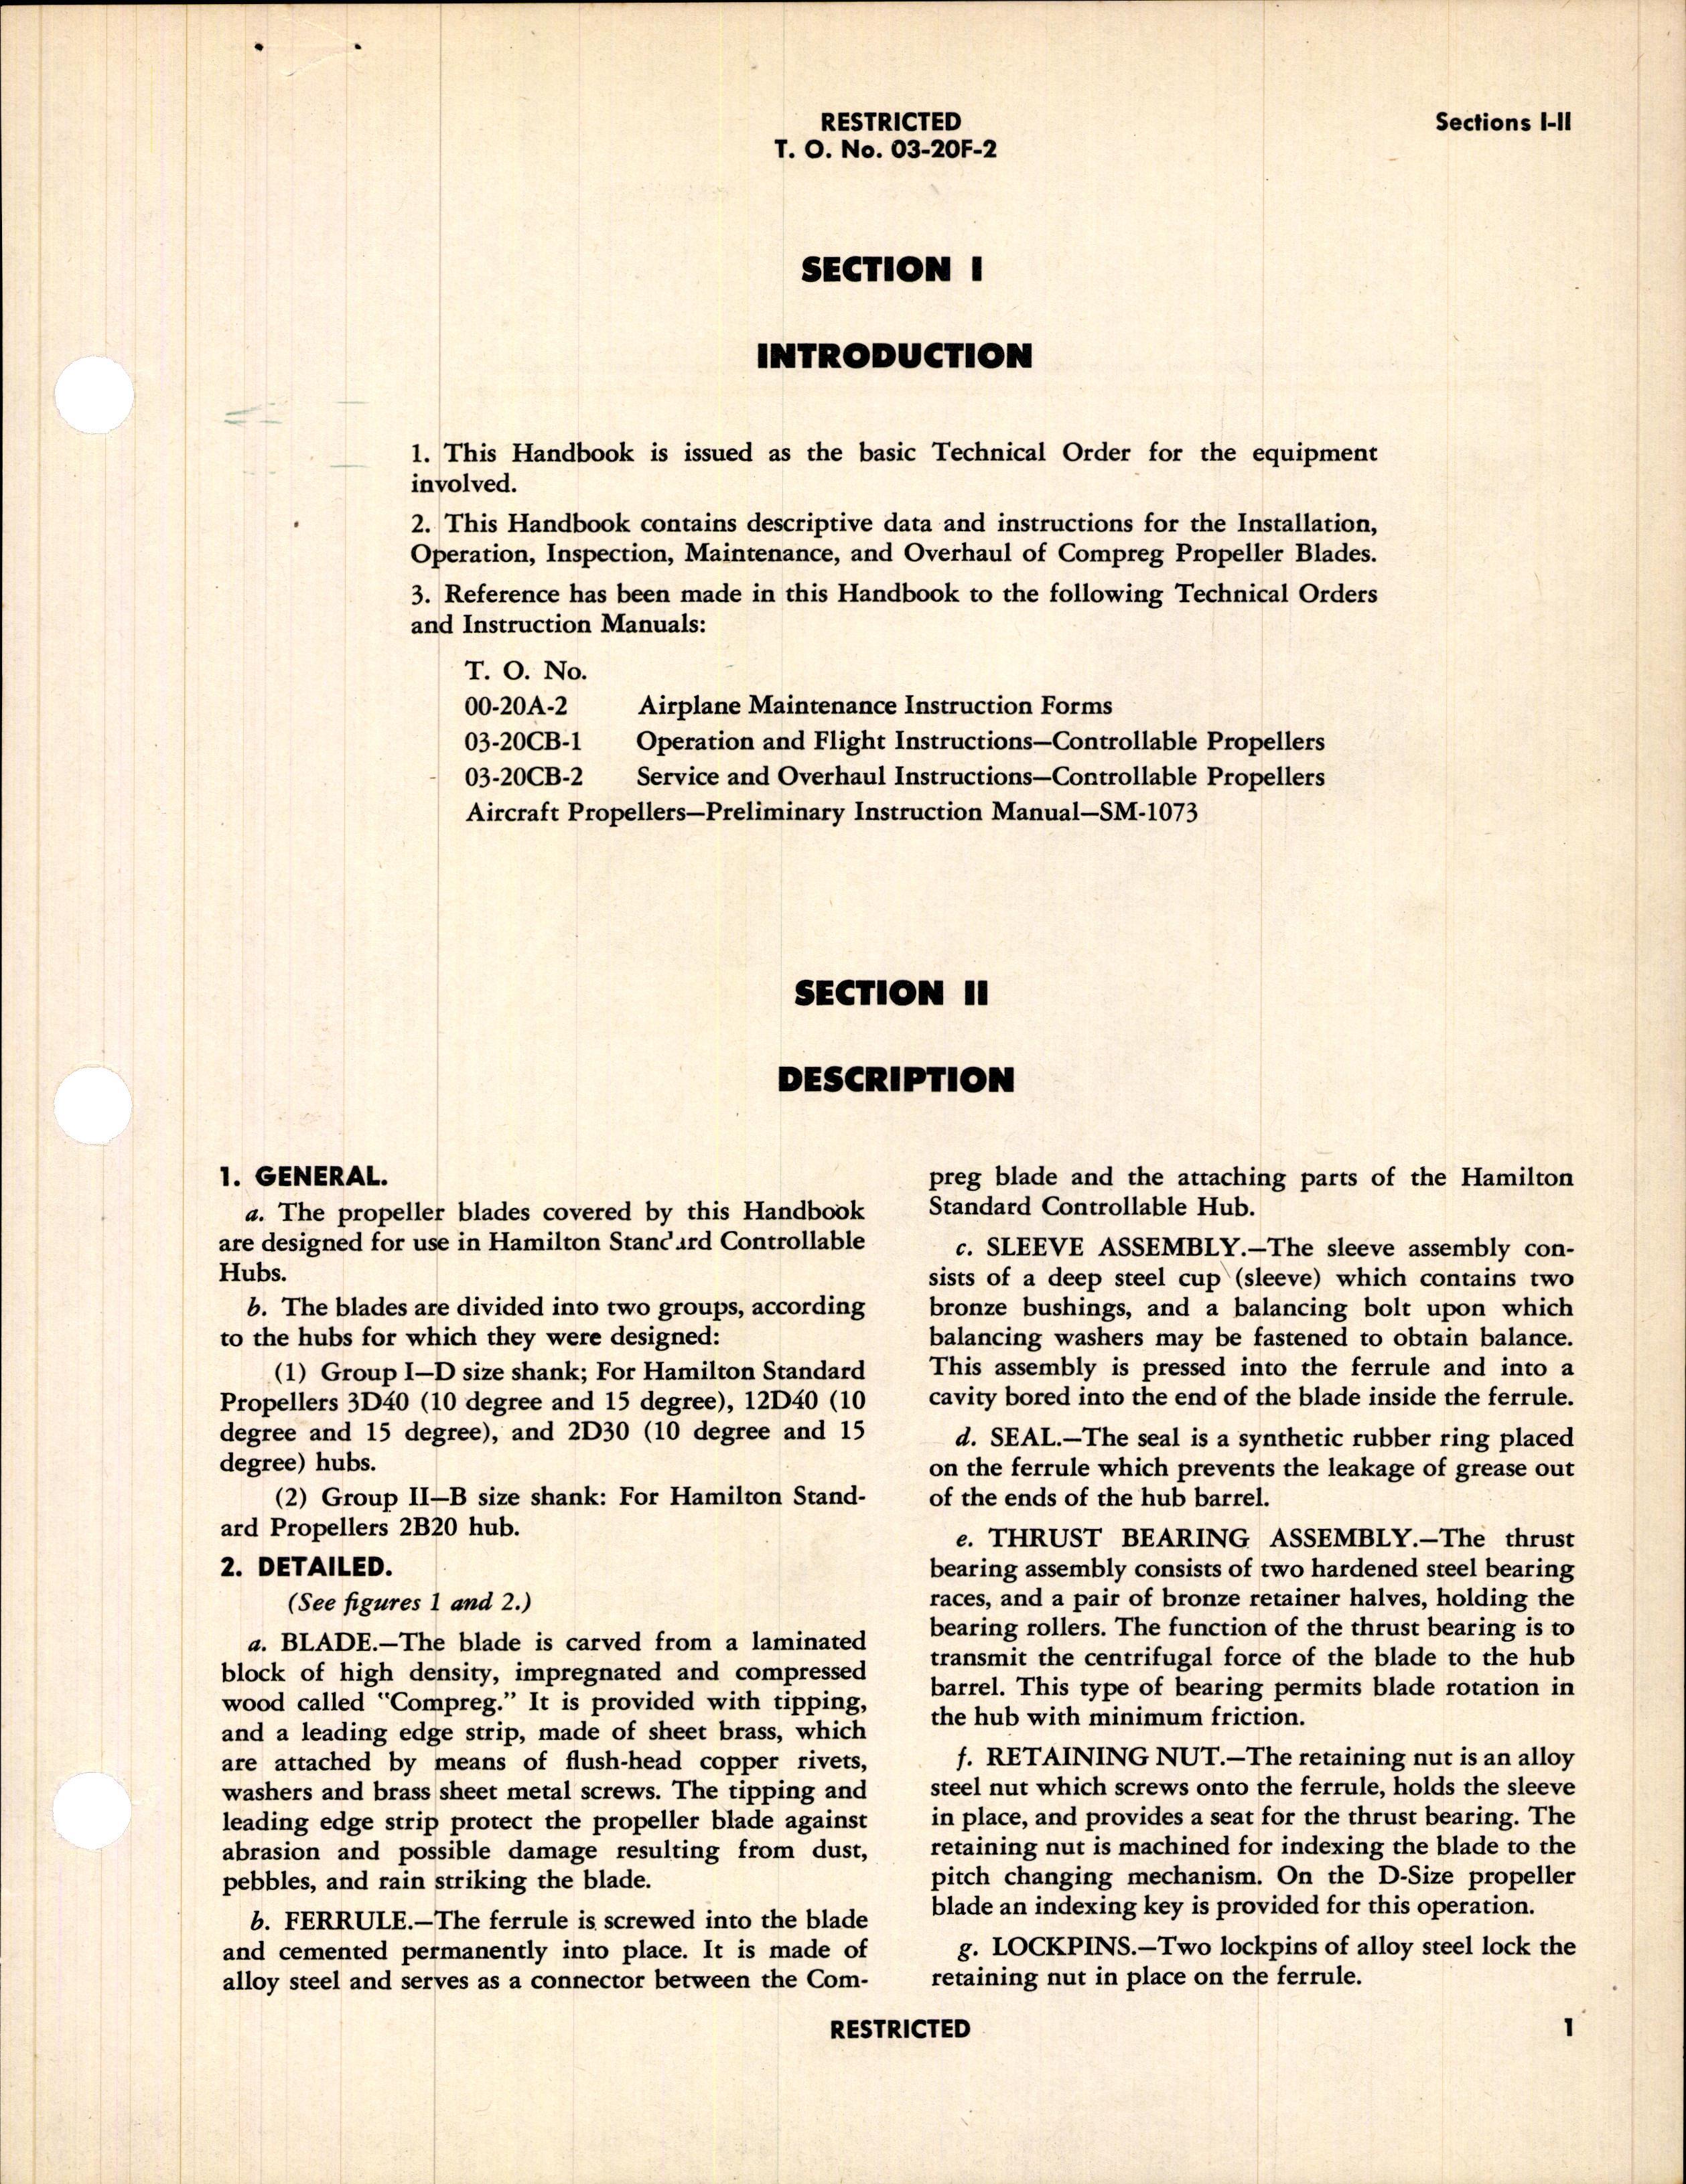 Sample page 5 from AirCorps Library document: Handbook of Instructions with Parts Catalog for Compreg Propeller Blades